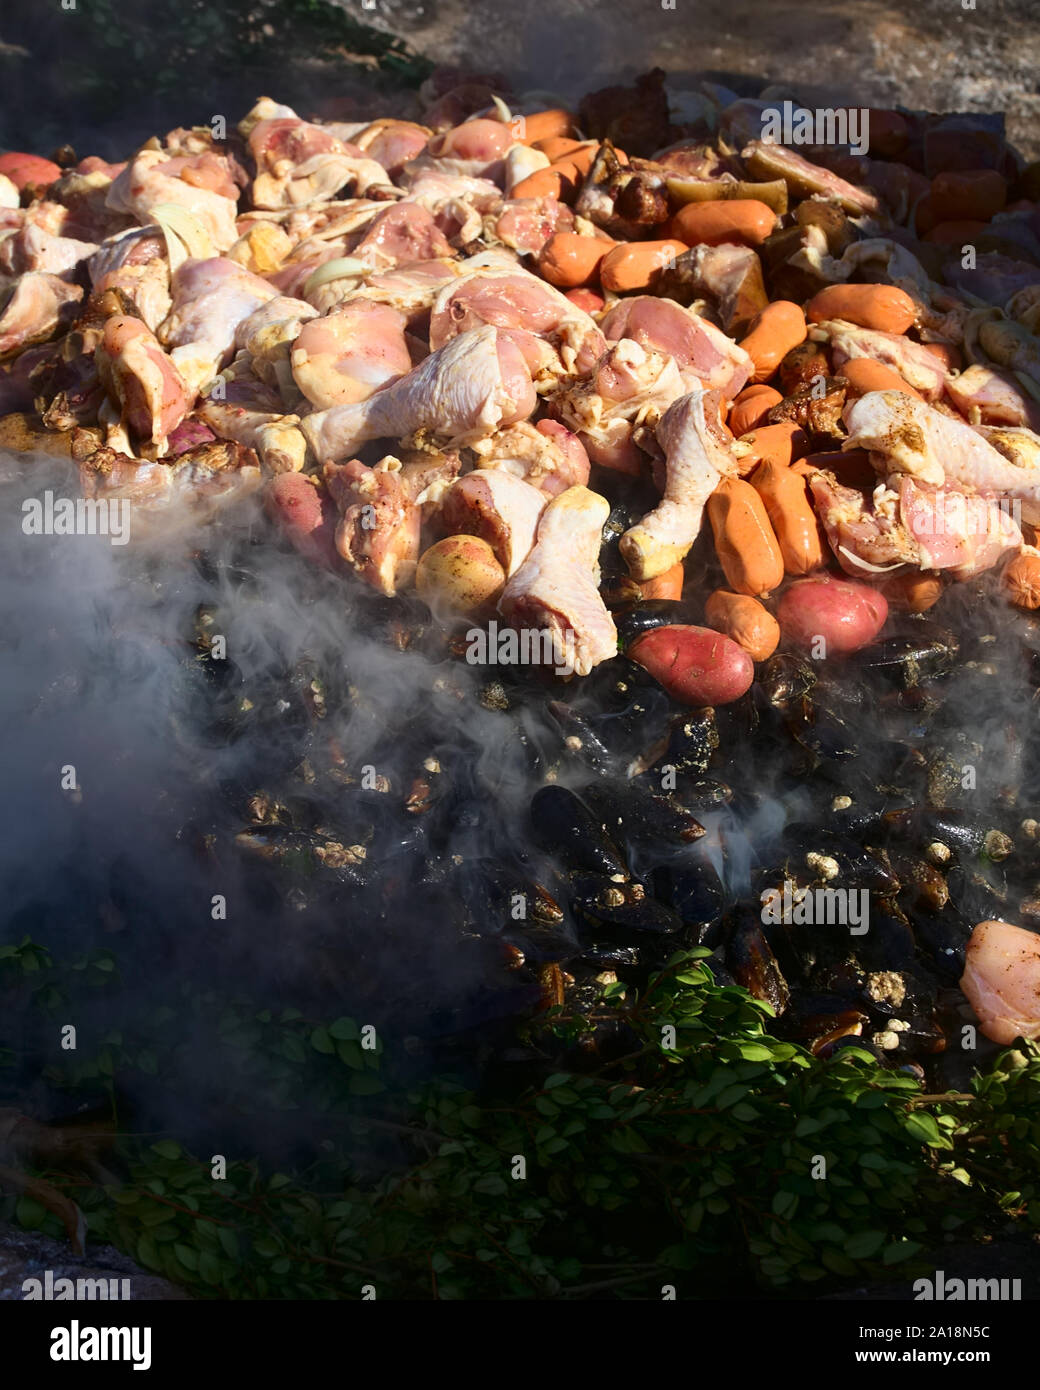 ACHAO, CHILE - FEBRUARY 6, 2016: The traditional Chilotan dish Curanto al hoyo is being prepared in a hole in the ground. Stock Photo